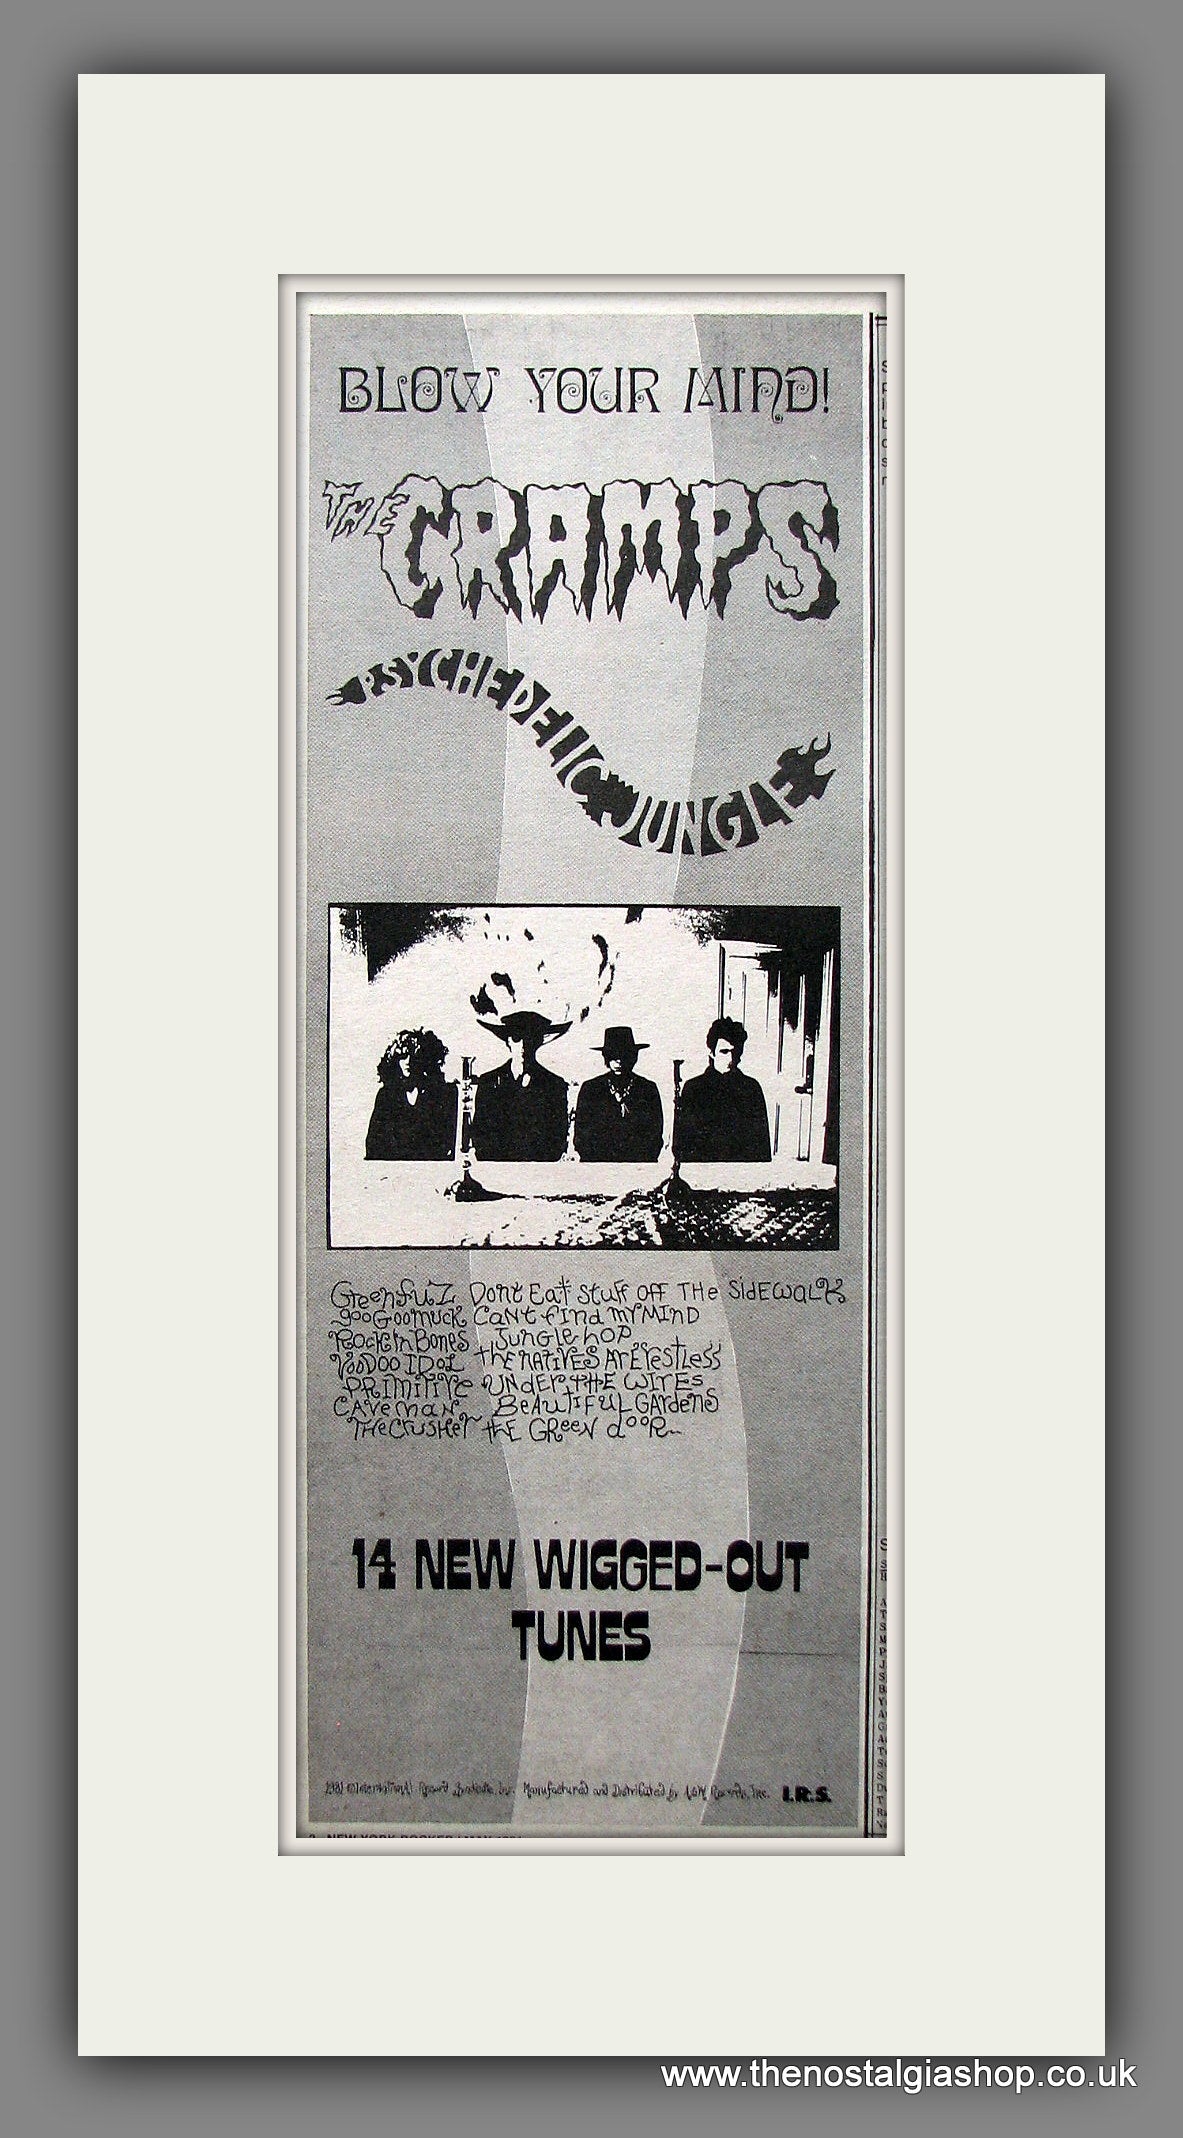 Cramps (The) Psychedelic Jungle. Original Advert 1981 (ref AD200161)